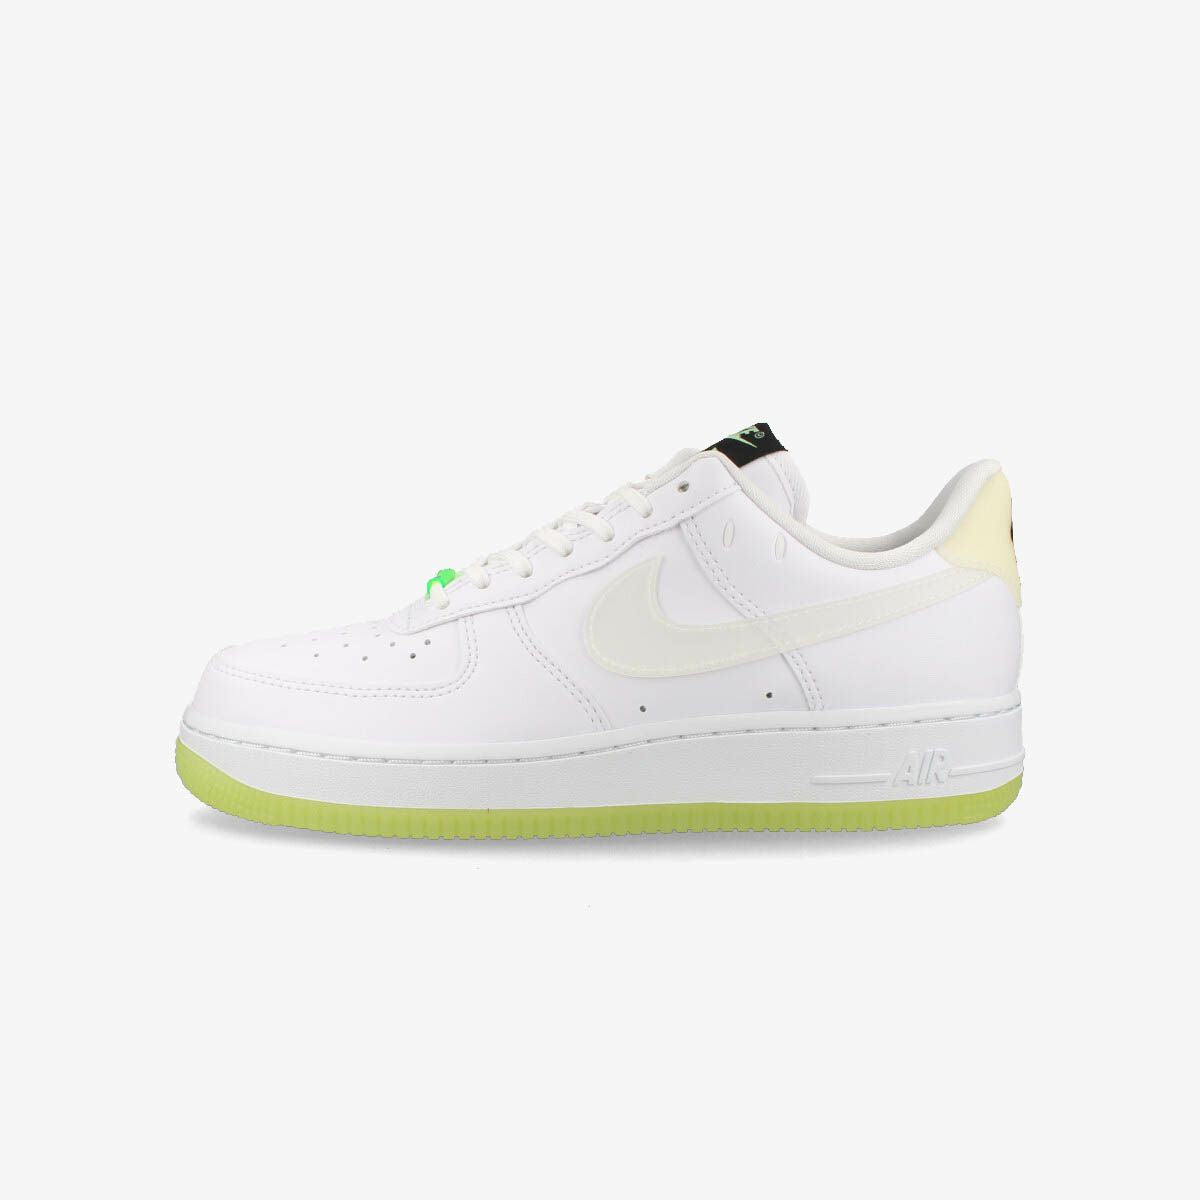 NIKE WMNS AIR FORCE 1 '07 LX [GLOW IN THE DARK] WHITE/BARELY VOLT/BLACK